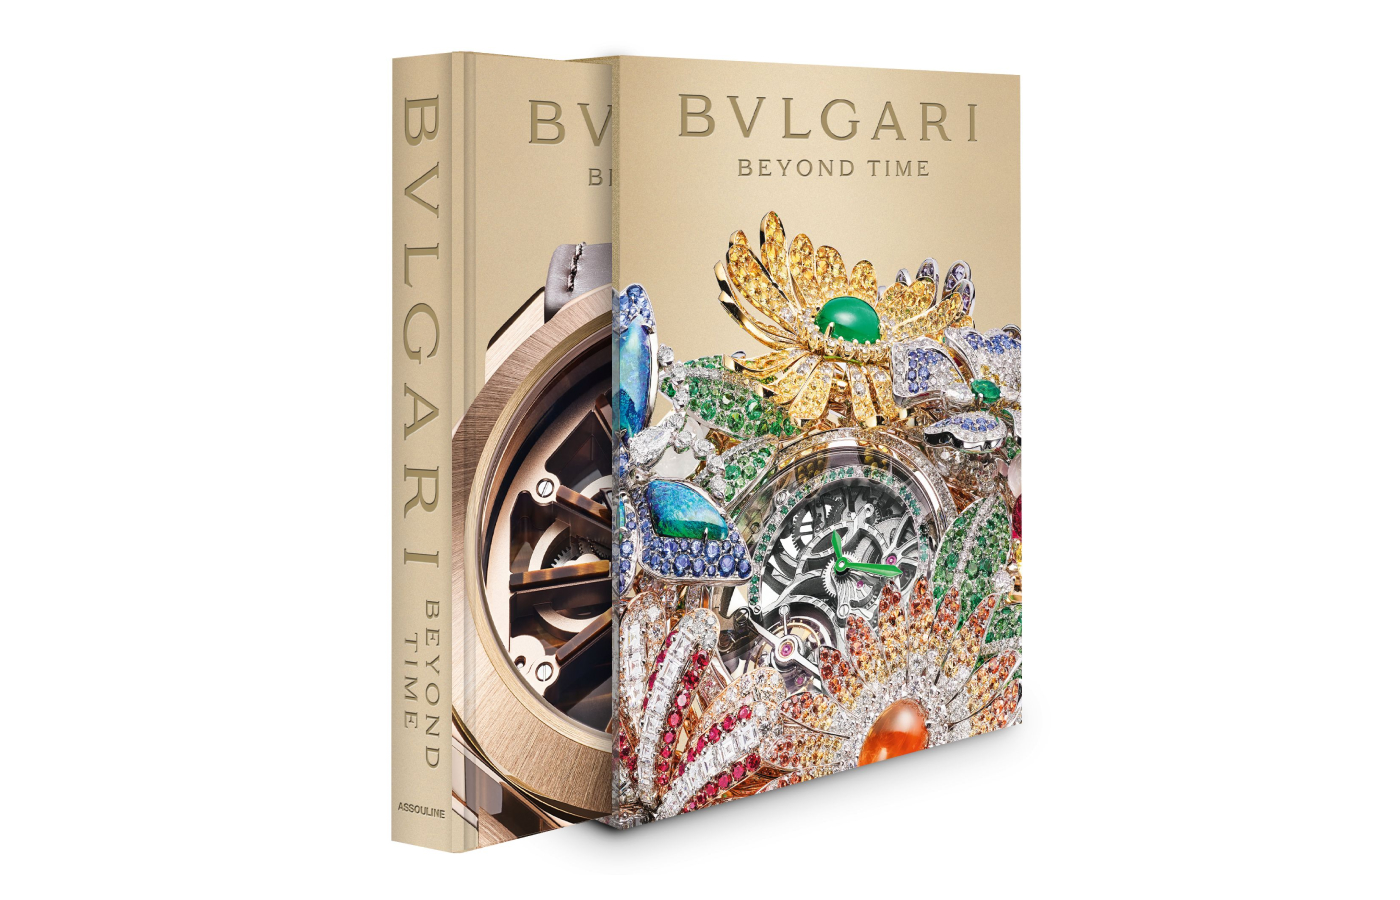 Bulgari: Beyond Time book published by Assouline